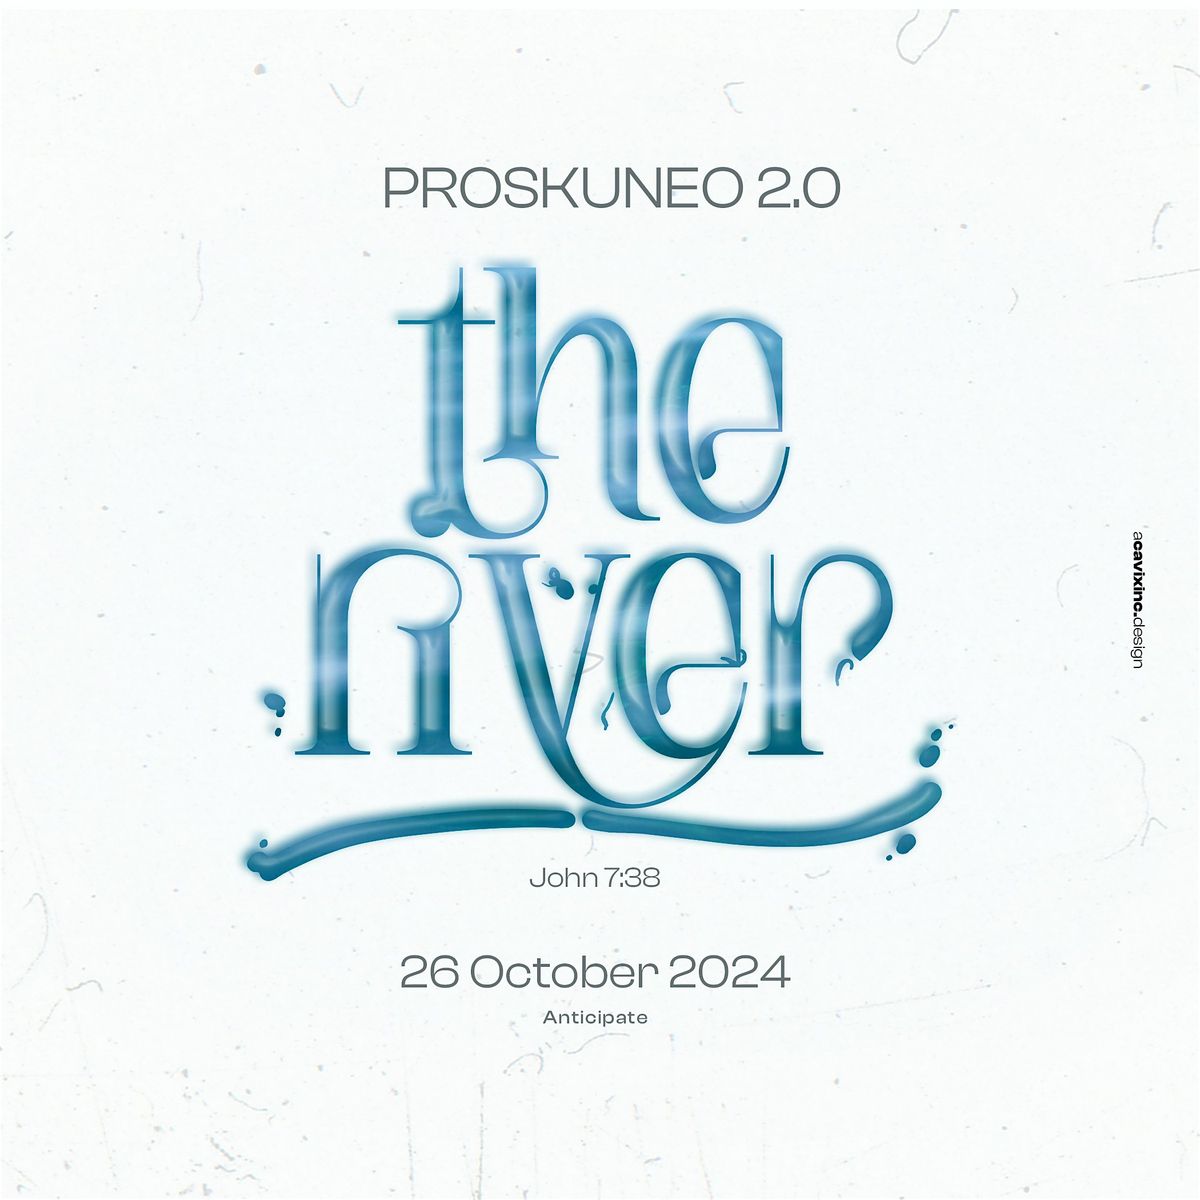 PROSKUNEO 2.0 - The River